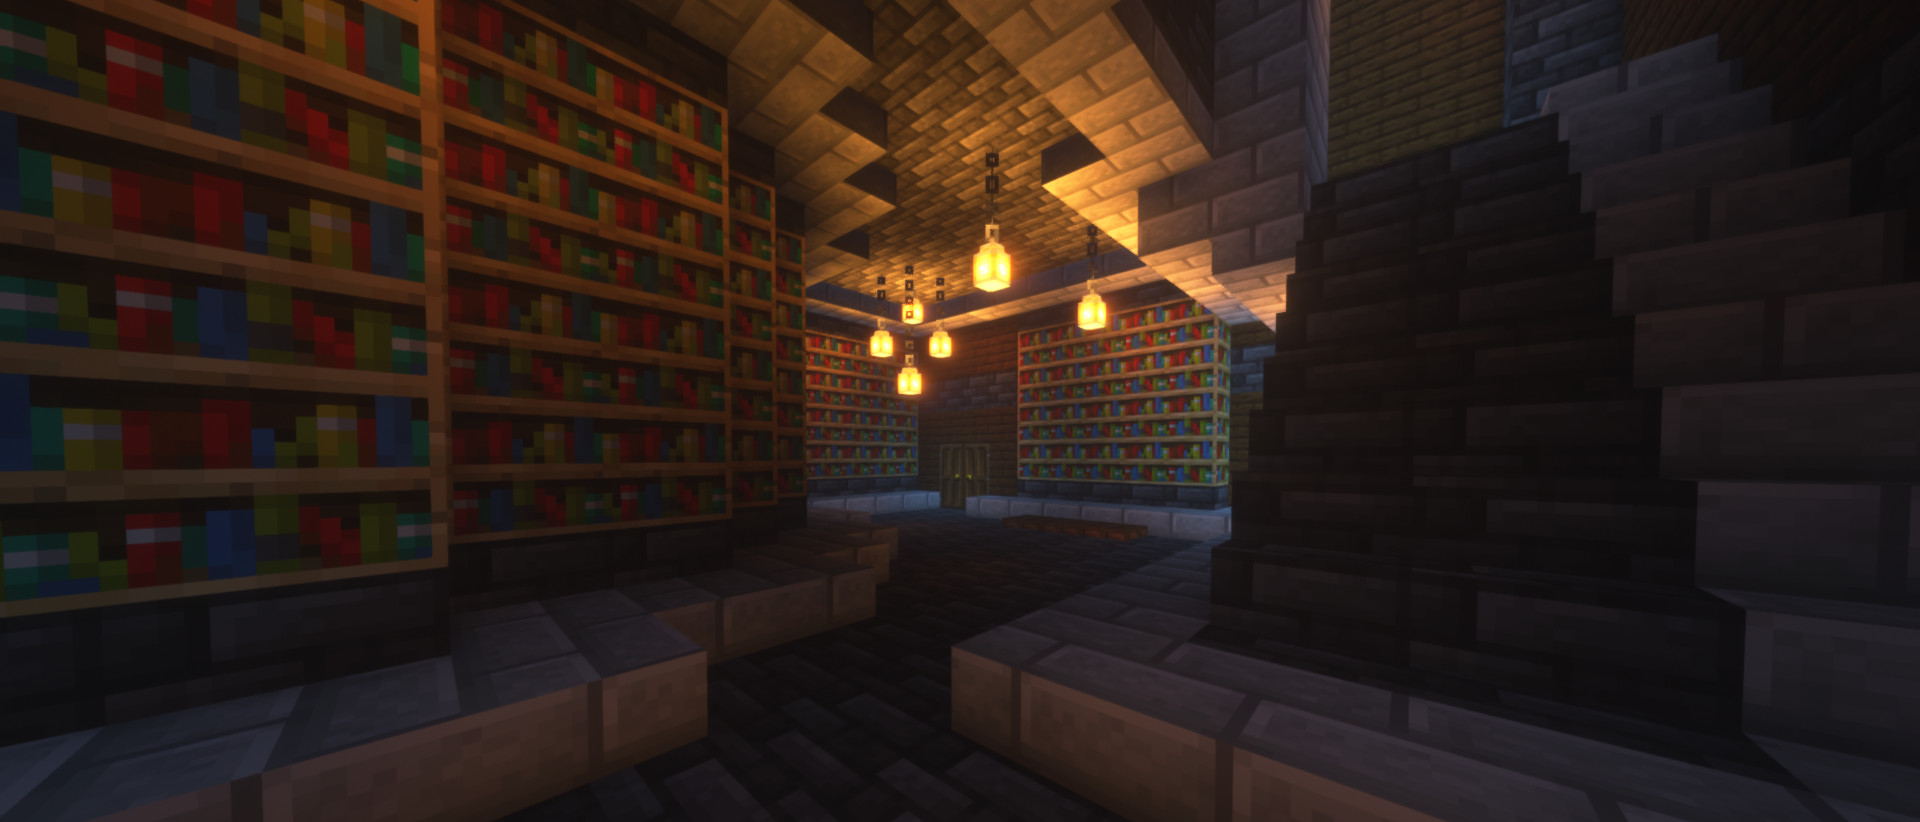 Minecraft Library of Babel